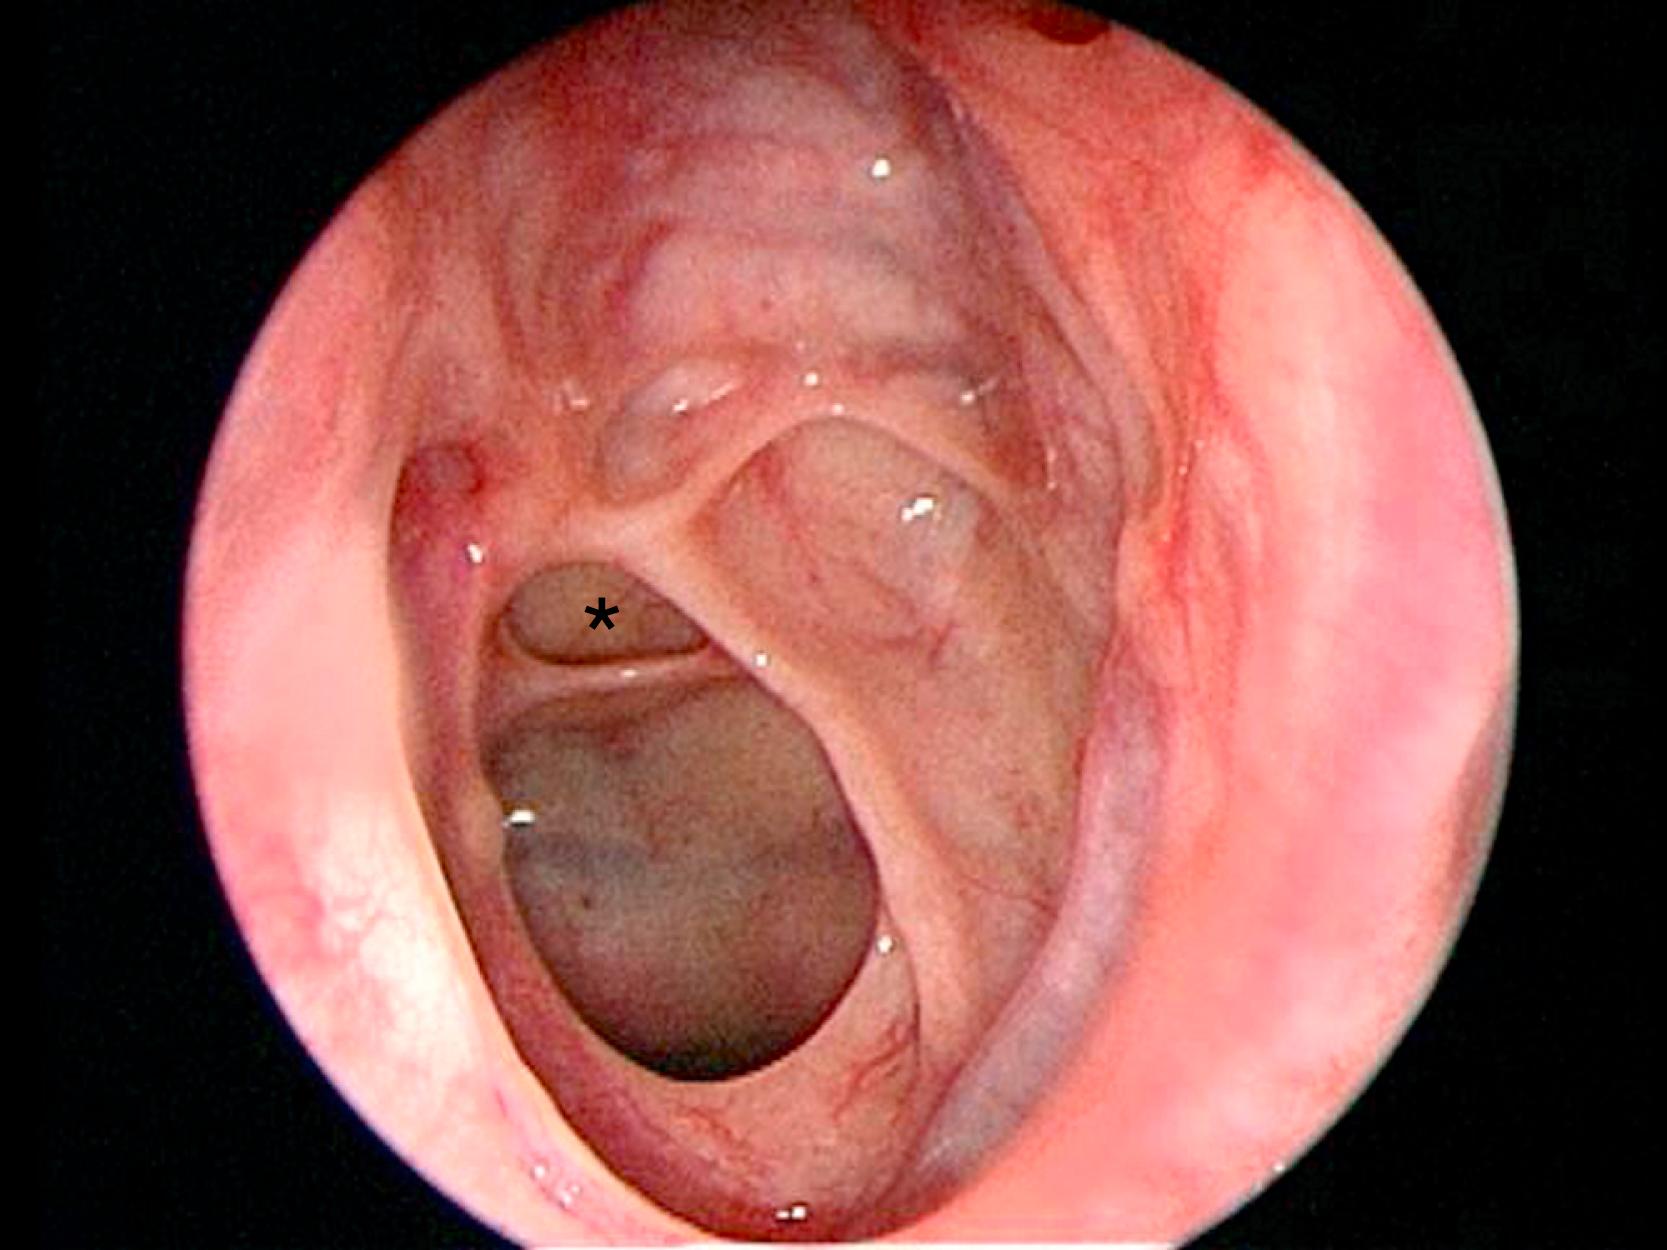 FIGURE 12.3, Endoscopic view of sphenoethmoid cell (Onodi cell). Identified by the asterisk (∗).